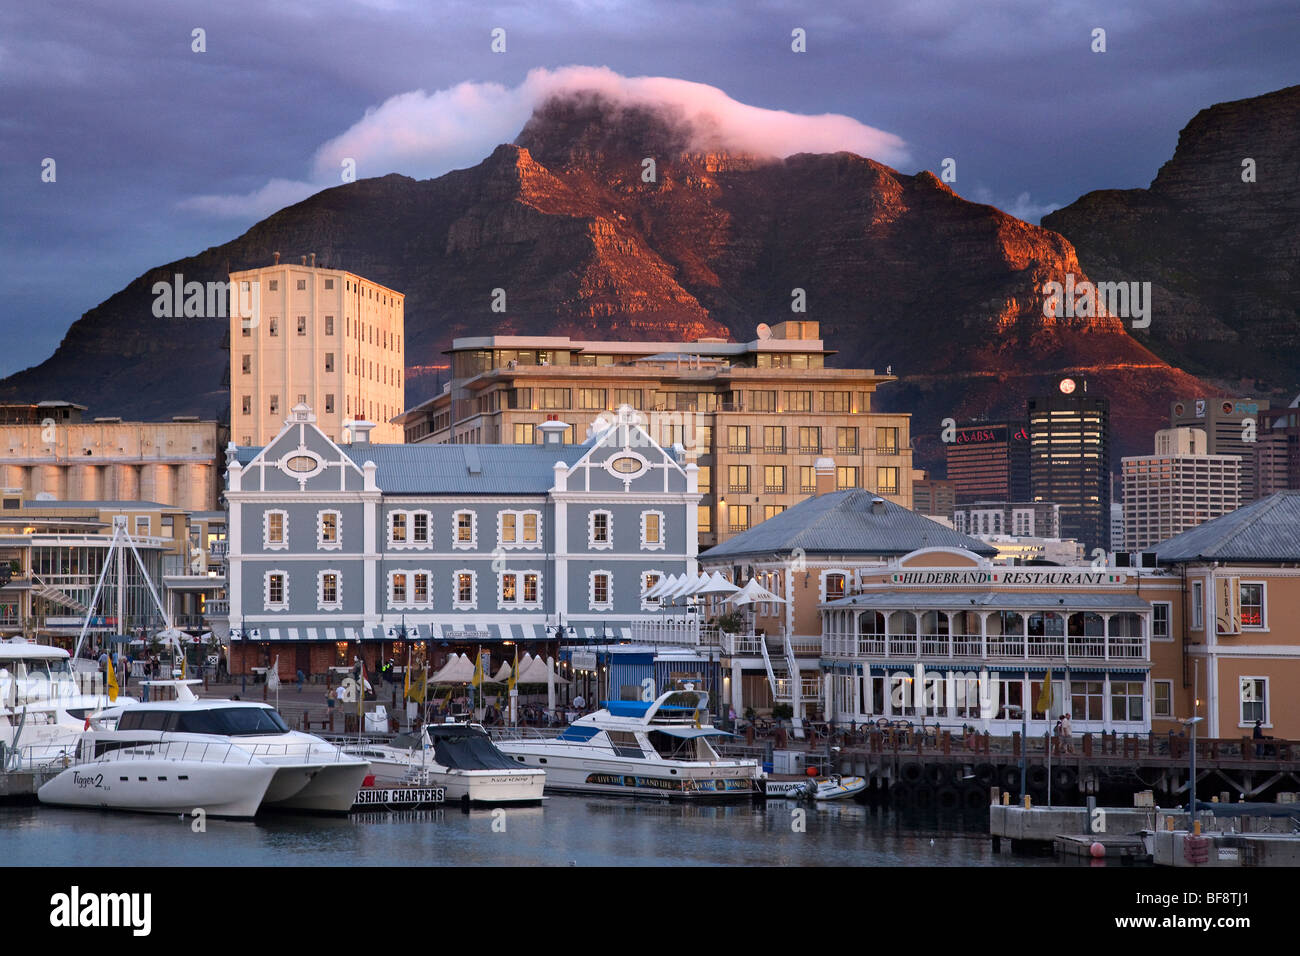 Cloud hangs over Table Mountain at sunset, the Victoria and Alfred Waterfront, Cape Town, South Africa Stock Photo